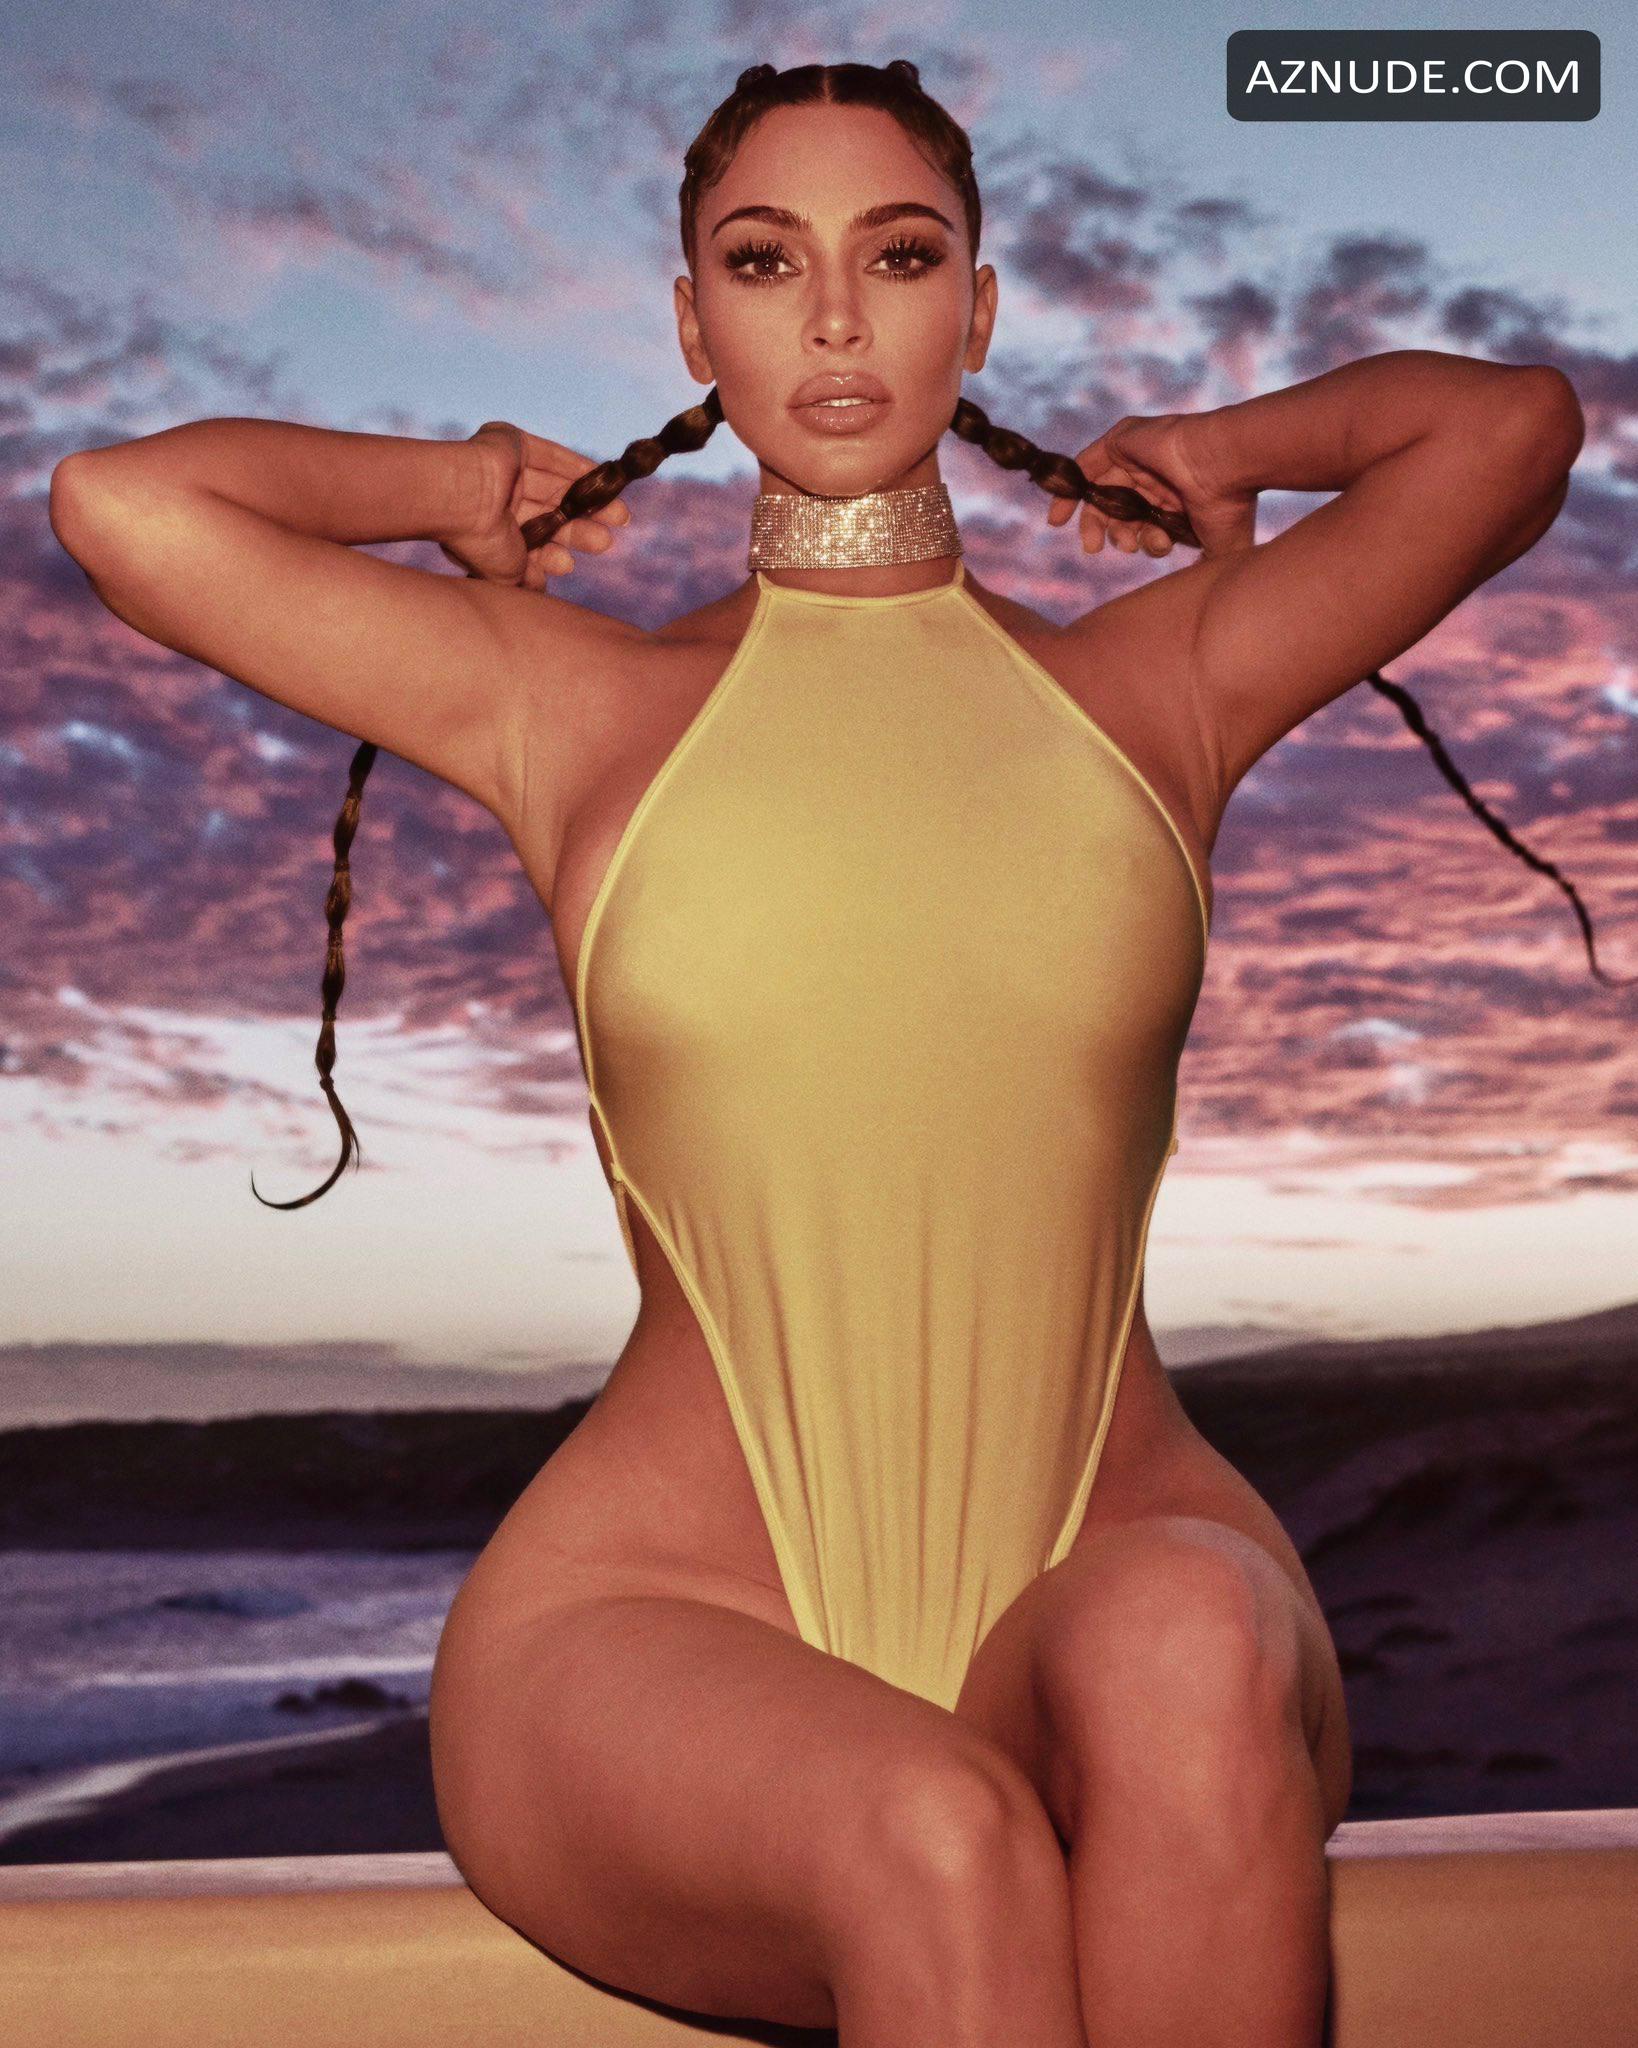 Kim Kardashian West Shows Off Her Boobs And Wide Hips Posing In A Revealing Yellow Swimsuit In A